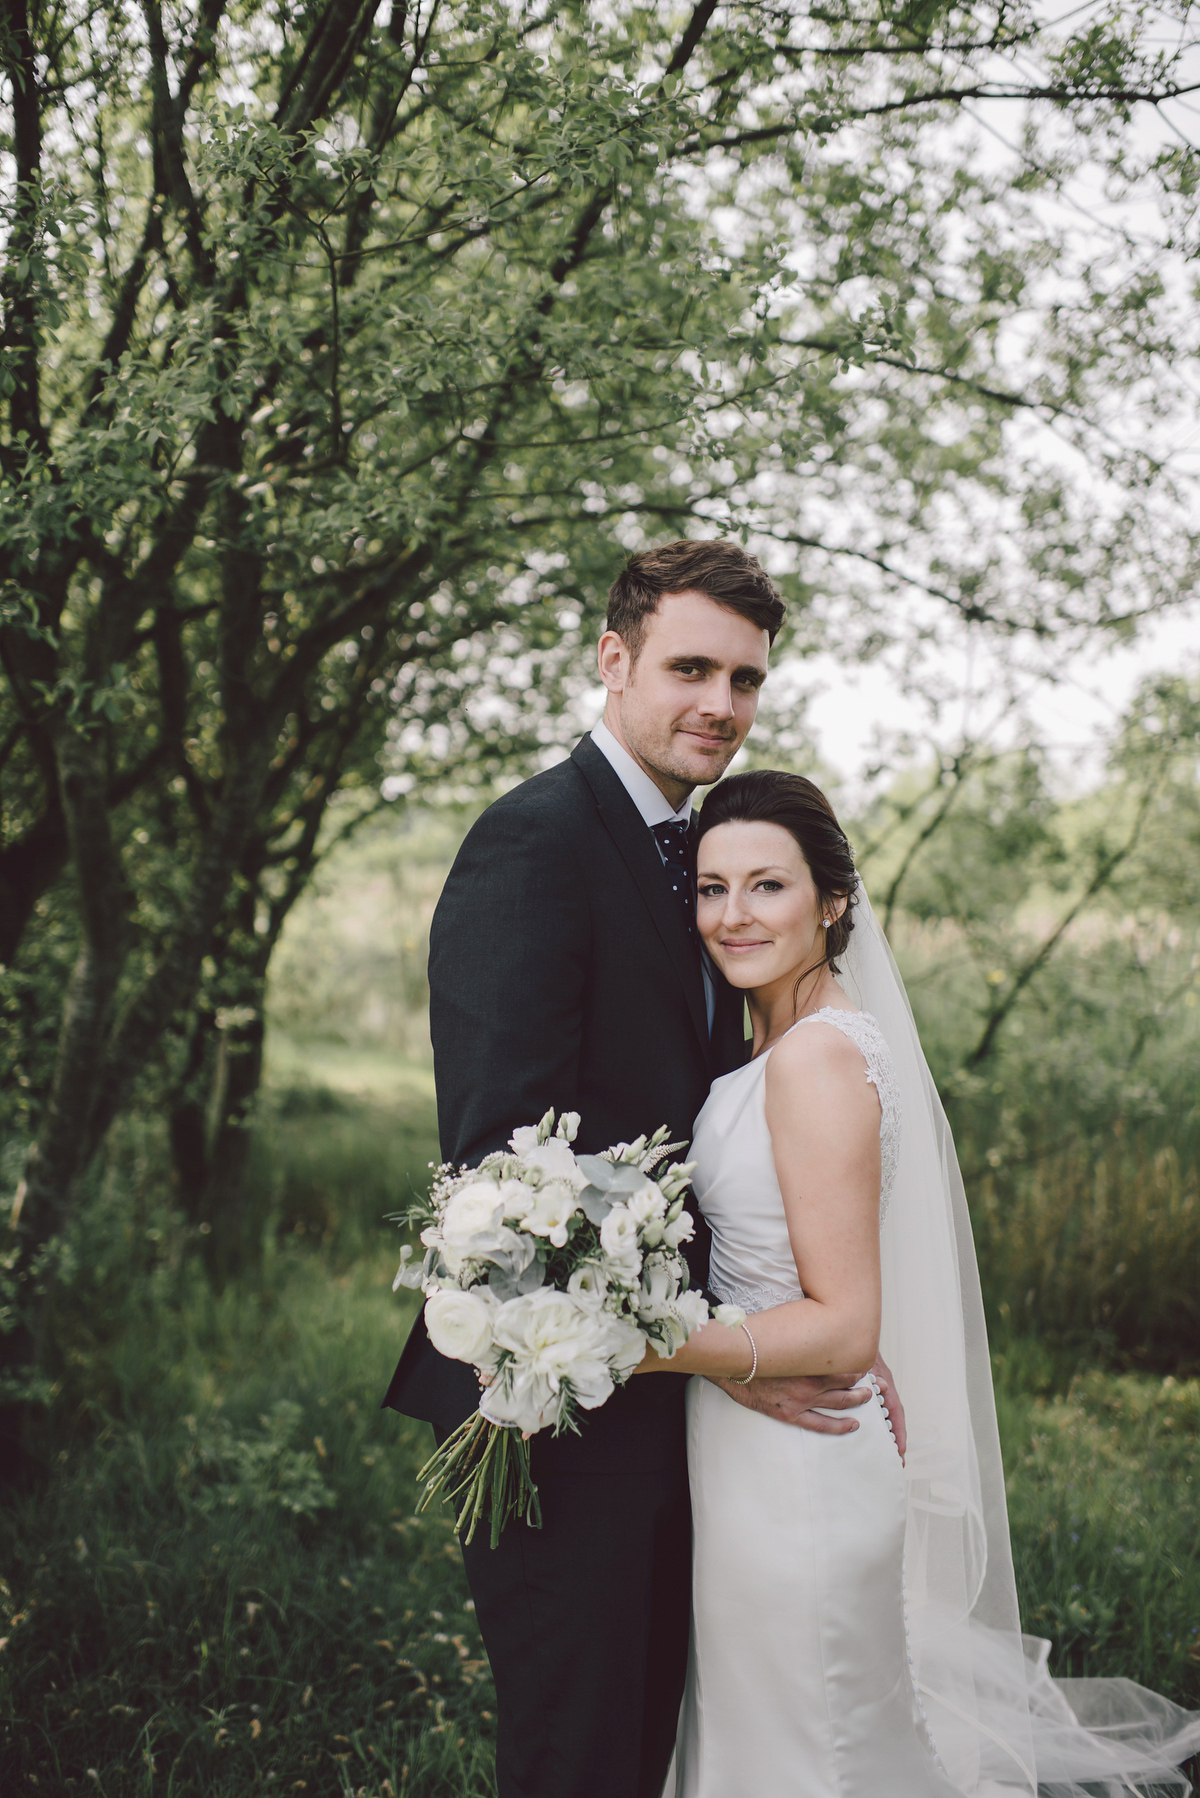 Bride Nina wore a Sincerity gown for her rustic and handmade Spring country barn wedding. Photography by Roberta Matis.